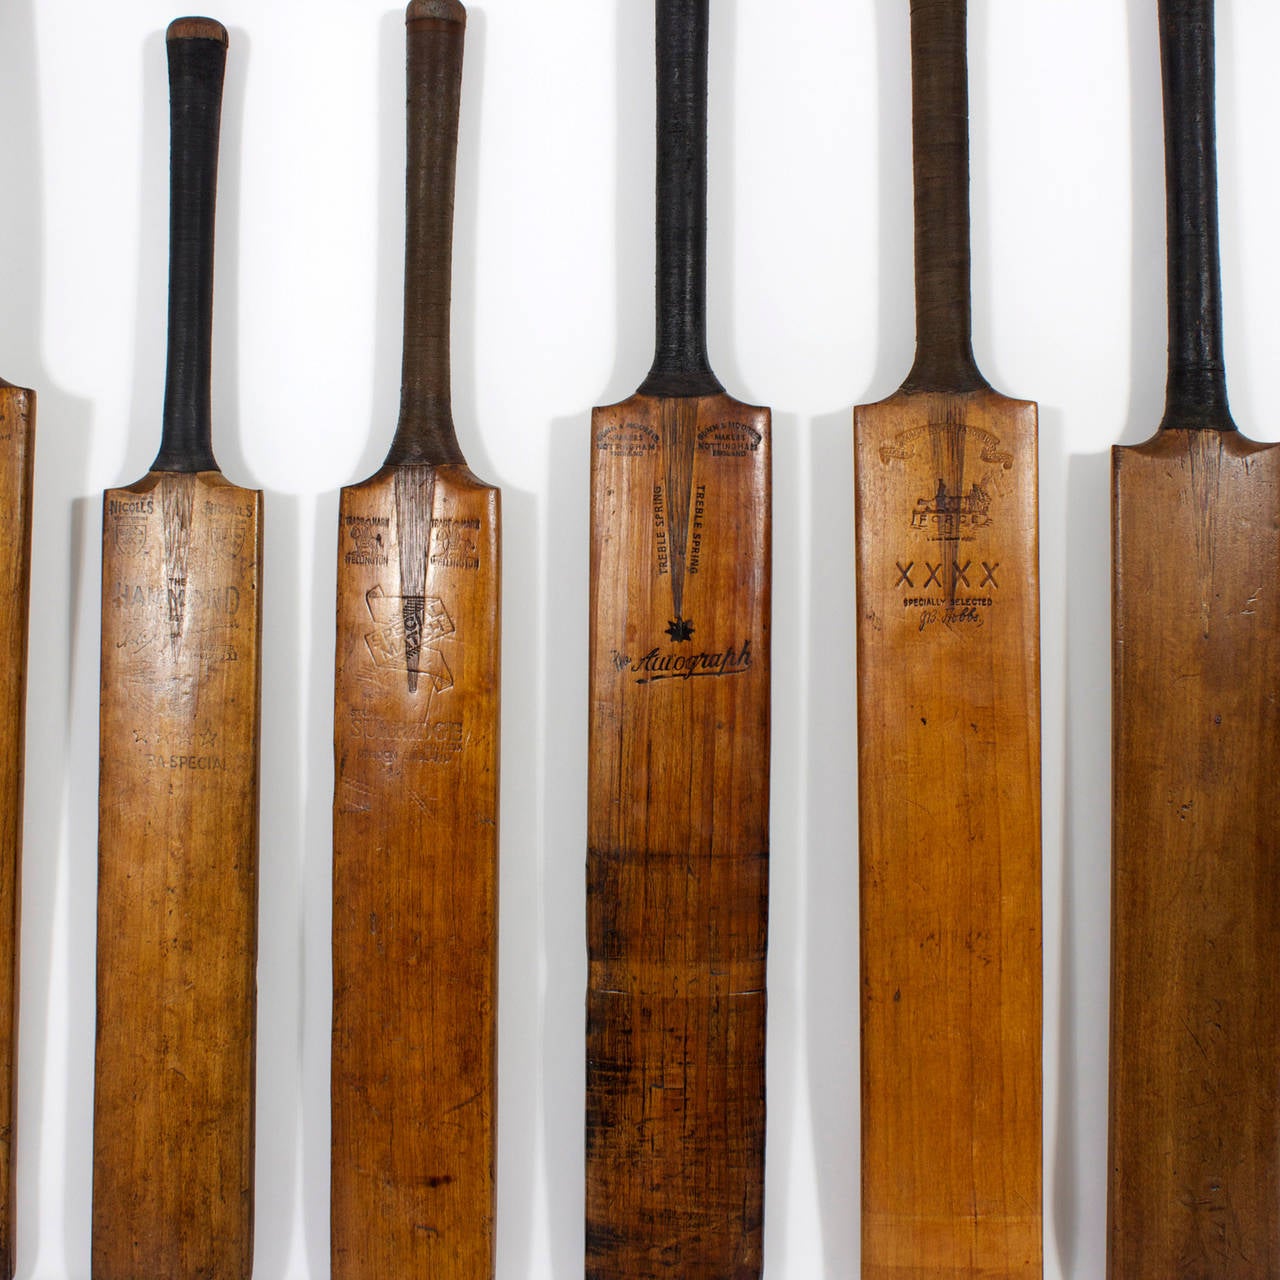 English Collection of Fvie Cricket Bats, Great Color and Patina